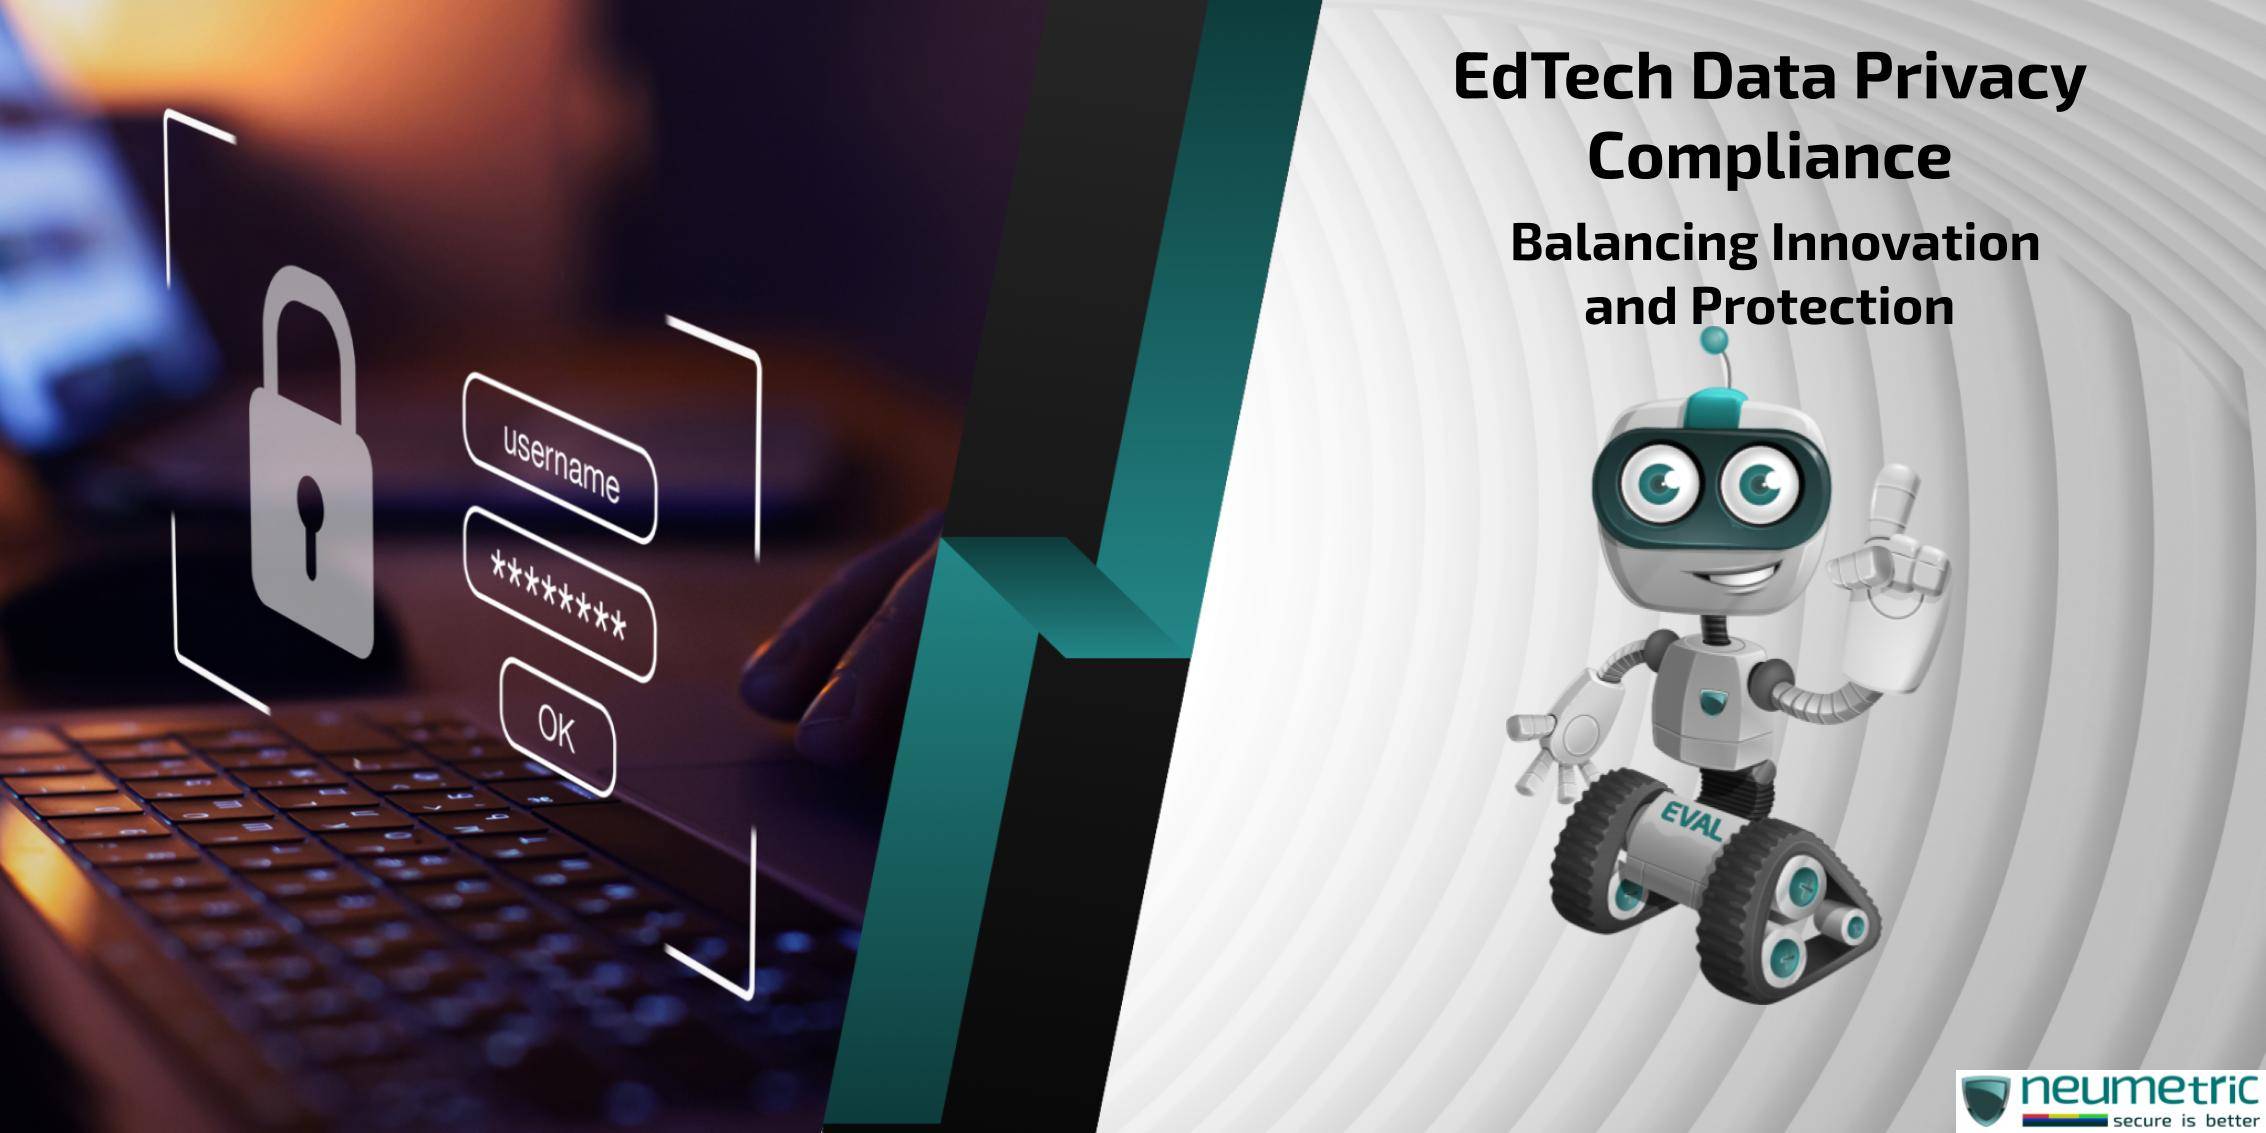 EdTech Data Privacy Compliance: Balancing Innovation & Protection